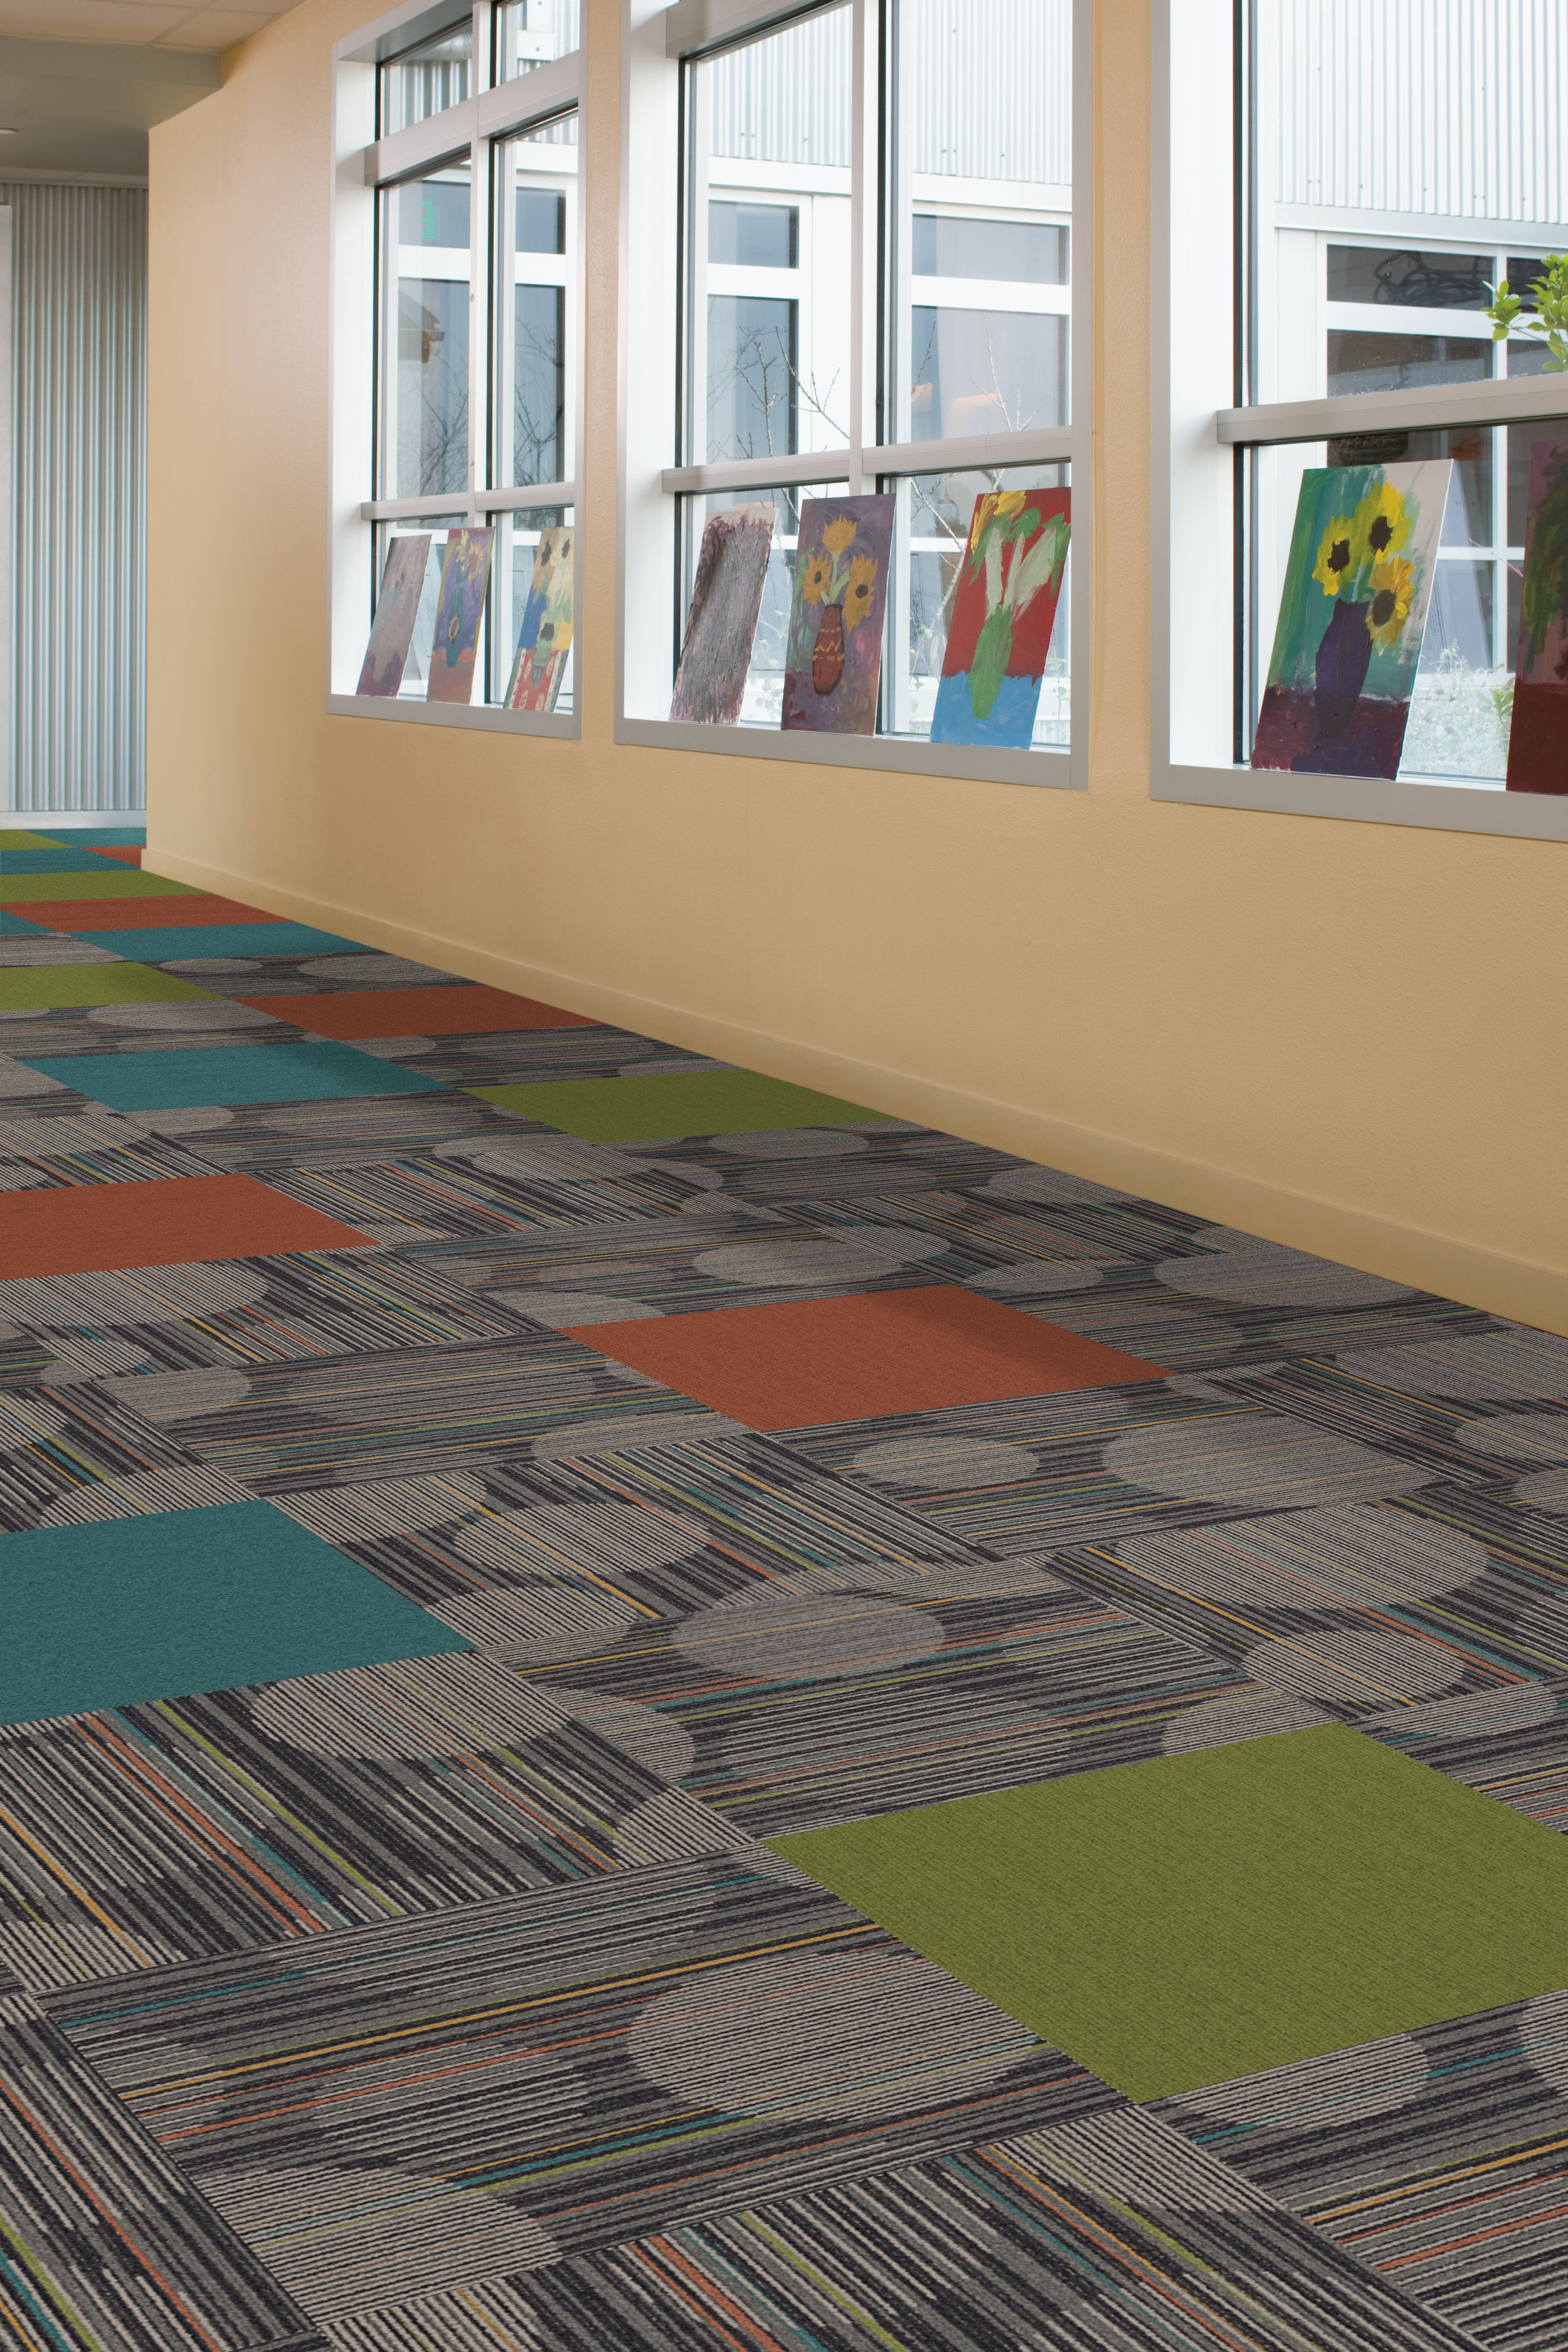 Interface Extra Curricular and Viva Colores carpet tiles in school hallway with student artwork in windows image number 2